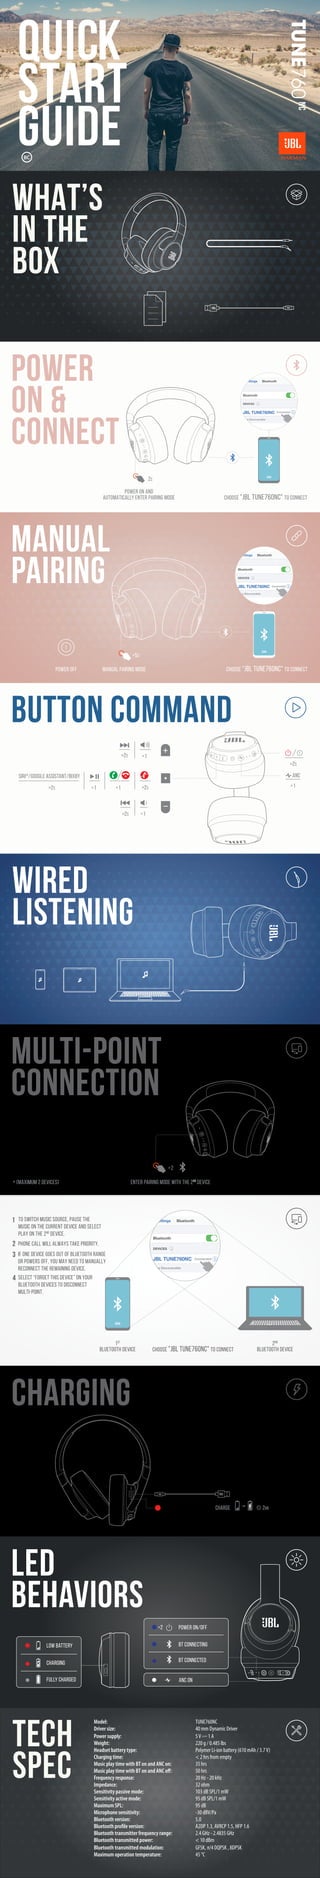 WHAT’S
IN THE
BOX
quick
start
guide
POWER ON AND
AUTOMATICALLY ENTER PAIRING MODE Choose "JBL TUNE760NC" to connect
ON
Settings Bluetooth
Bluetooth
DEVICES
JBL TUNE760NC
Now Discoverable
Connected
Choose "JBL TUNE760NC" to connect
Manual pairing mode
POWER OFF
Siri®
/Google Assistant/Bixby
ENTER PAIRING MODE WITH THE 2nd
DEVICE
* (Maximum 2 devices)
led
behaviors
Wired
listening
Manual
Pairing
TUNE
760
NC
ANC
ON
Settings Bluetooth
Bluetooth
DEVICES
JBL TUNE760NC
Now Discoverable
Connected
TECH
SPEC
>5S
×1
>2S ×1
×1 >2S
>2S
×1
×1
>2S
>2S
Low battery
CHARGING
FULLY CHARGED
BT CONNECTING
BT connected
POWER ON/OFF
×2
ANC ON
power
on &
connect
BUTTON COMMAND
Multi-point
connection
1 To switch music source, pause the
music on the current device and select
play on the 2nd
device.
2 Phone call will always take priority.
3 If one device goes out of bluetooth range
or powers off, you may need to manually
reconnect the remaining device.
4 SELECT “forget this device” on your
bluetooth devices to disconnect
multi-point.
1st
bluetooth device
2nd
bluetooth device
Choose "JBL TUNE760NC" to connect
ON
Settings Bluetooth
Bluetooth
DEVICES
JBL TUNE760NC
Now Discoverable
Connected
Charging
×2
2S
Model: TUNE760NC
Driver size: 40 mm Dynamic Driver
Power supply: 5V 1 A
Weight: 220 g / 0.485 lbs
Headset battery type: Polymer Li-ion battery (610 mAh / 3.7V)
Charging time: < 2 hrs from empty
Music play time with BT on and ANC on: 35 hrs
Music play time with BT on and ANC off: 50 hrs
Frequency response: 20 Hz - 20 kHz
Impedance: 32 ohm
Sensitivity passive mode: 103 dB SPL/1 mW
Sensitivity active mode: 95 dB SPL/1 mW
Maximum SPL: 95 dB
Microphone sensitivity: -30 dBV/Pa
Bluetooth version: 5.0
Bluetooth profile version: A2DP 1.3, AVRCP 1.5, HFP 1.6
Bluetooth transmitter frequency range: 2.4 GHz - 2.4835 GHz
Bluetooth transmitted power: < 10 dBm
Bluetooth transmitted modulation: GFSK, π/4 DQPSK , 8DPSK
Maximum operation temperature: 45 °C
 